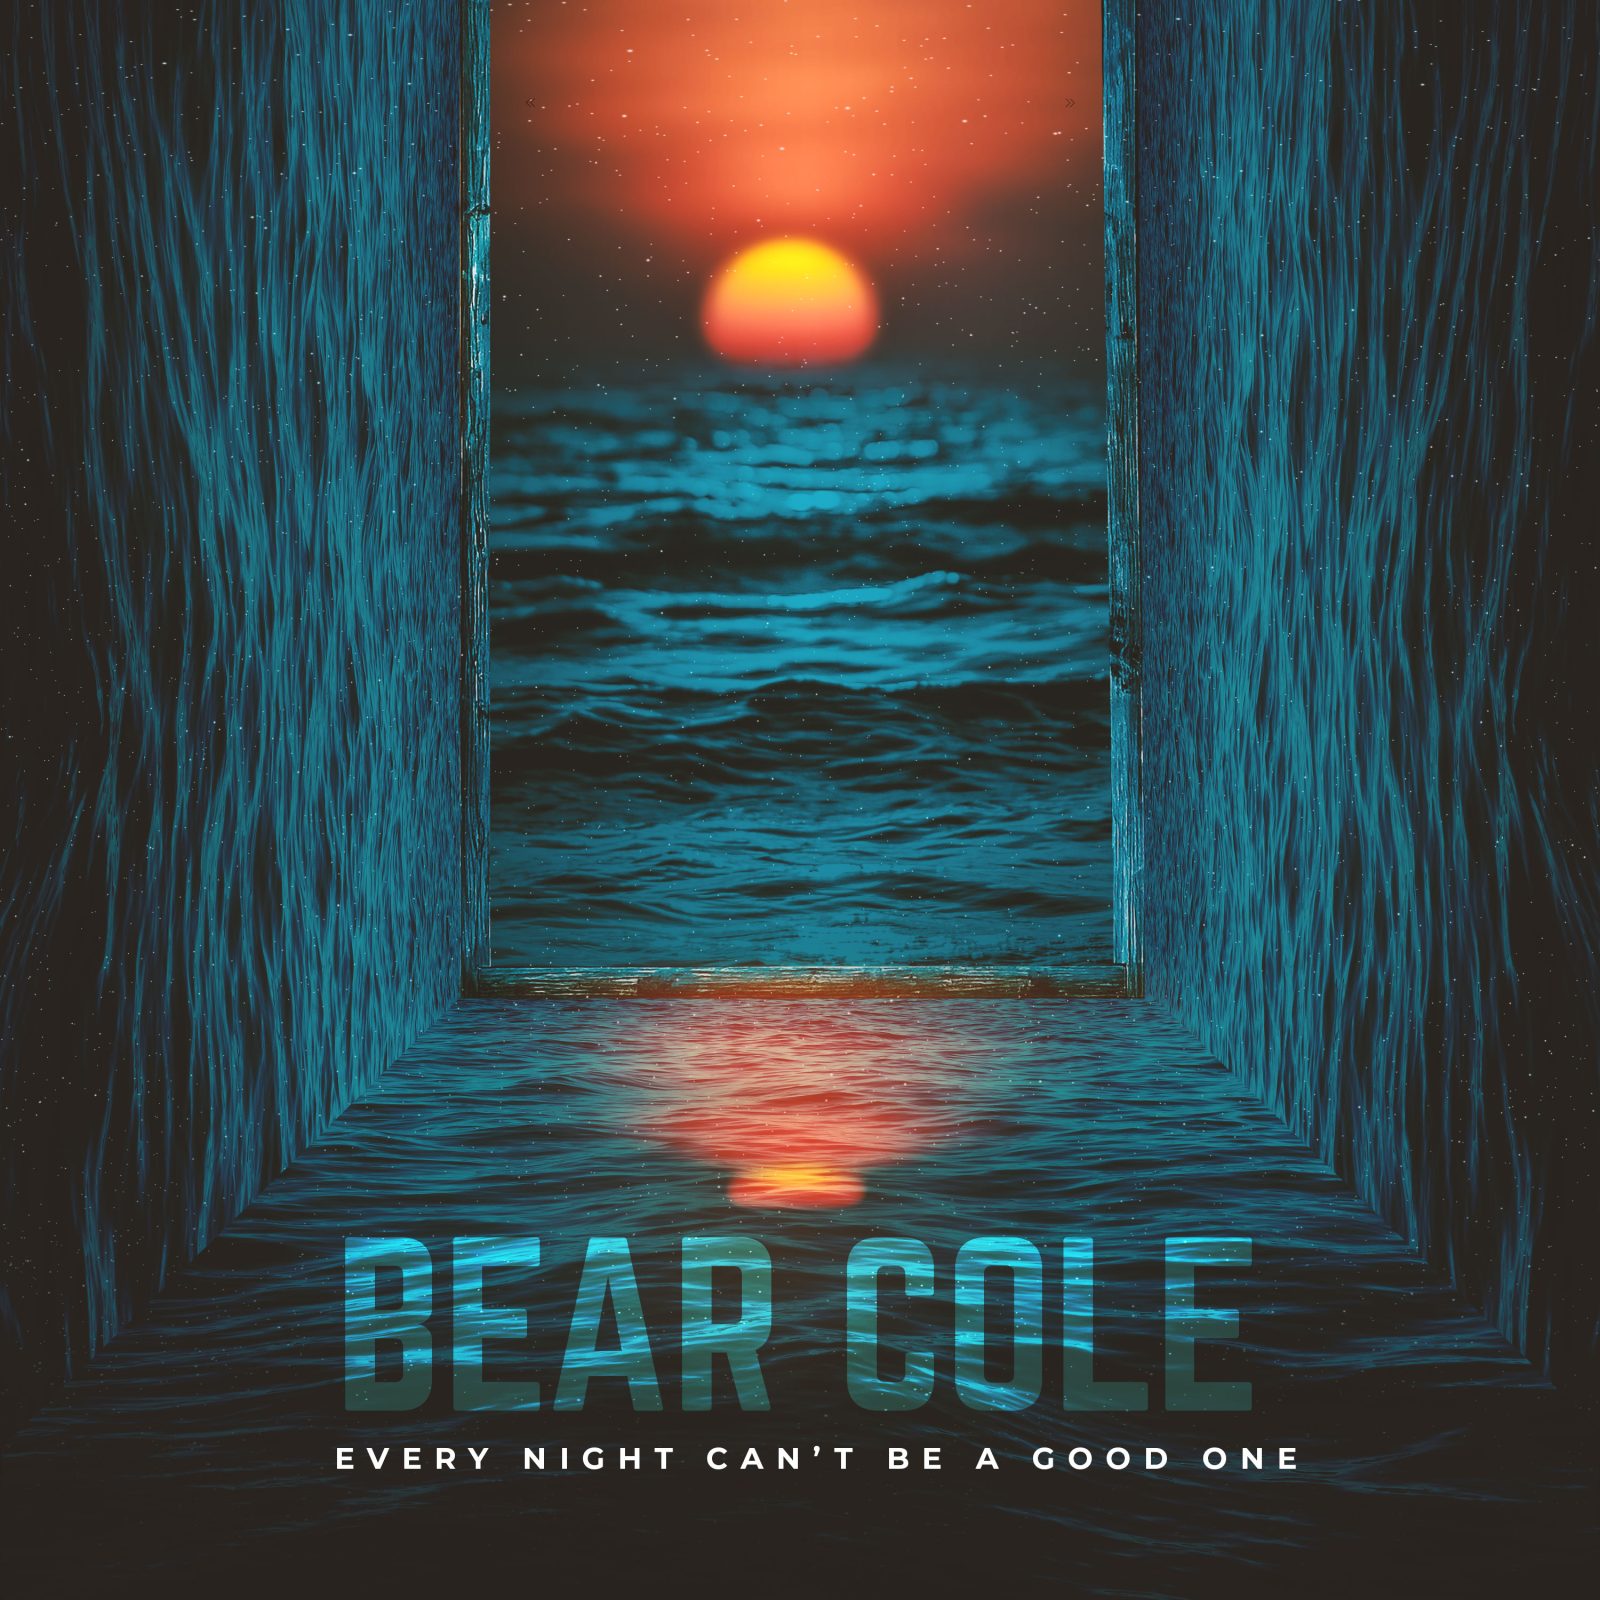 Every-Night-Can't-Be-A-Good-One---Bear-Cole